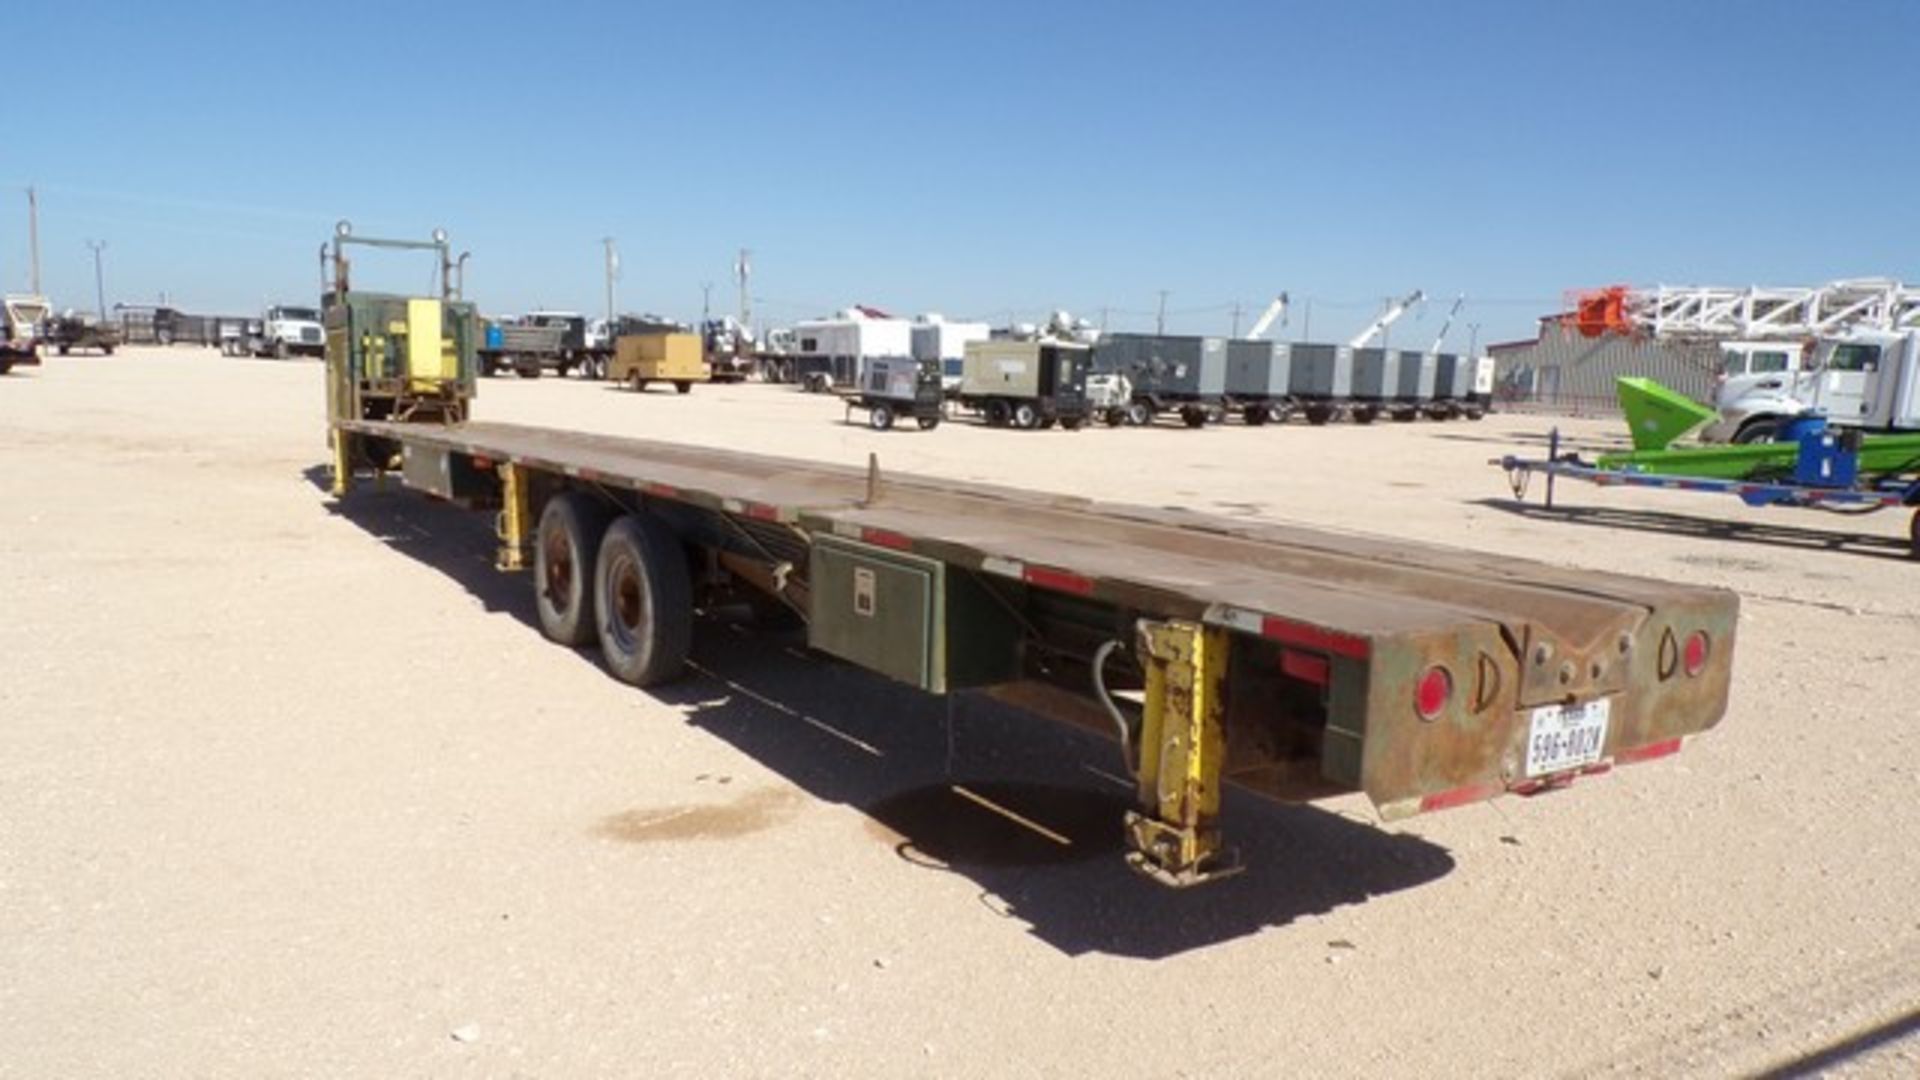 Located in YARD 1 - Midland, TX (2699) HYDROCAT SELF CONTAINED HYD CATWALK/ PIPE PICK UP & LAY - Bild 3 aus 6